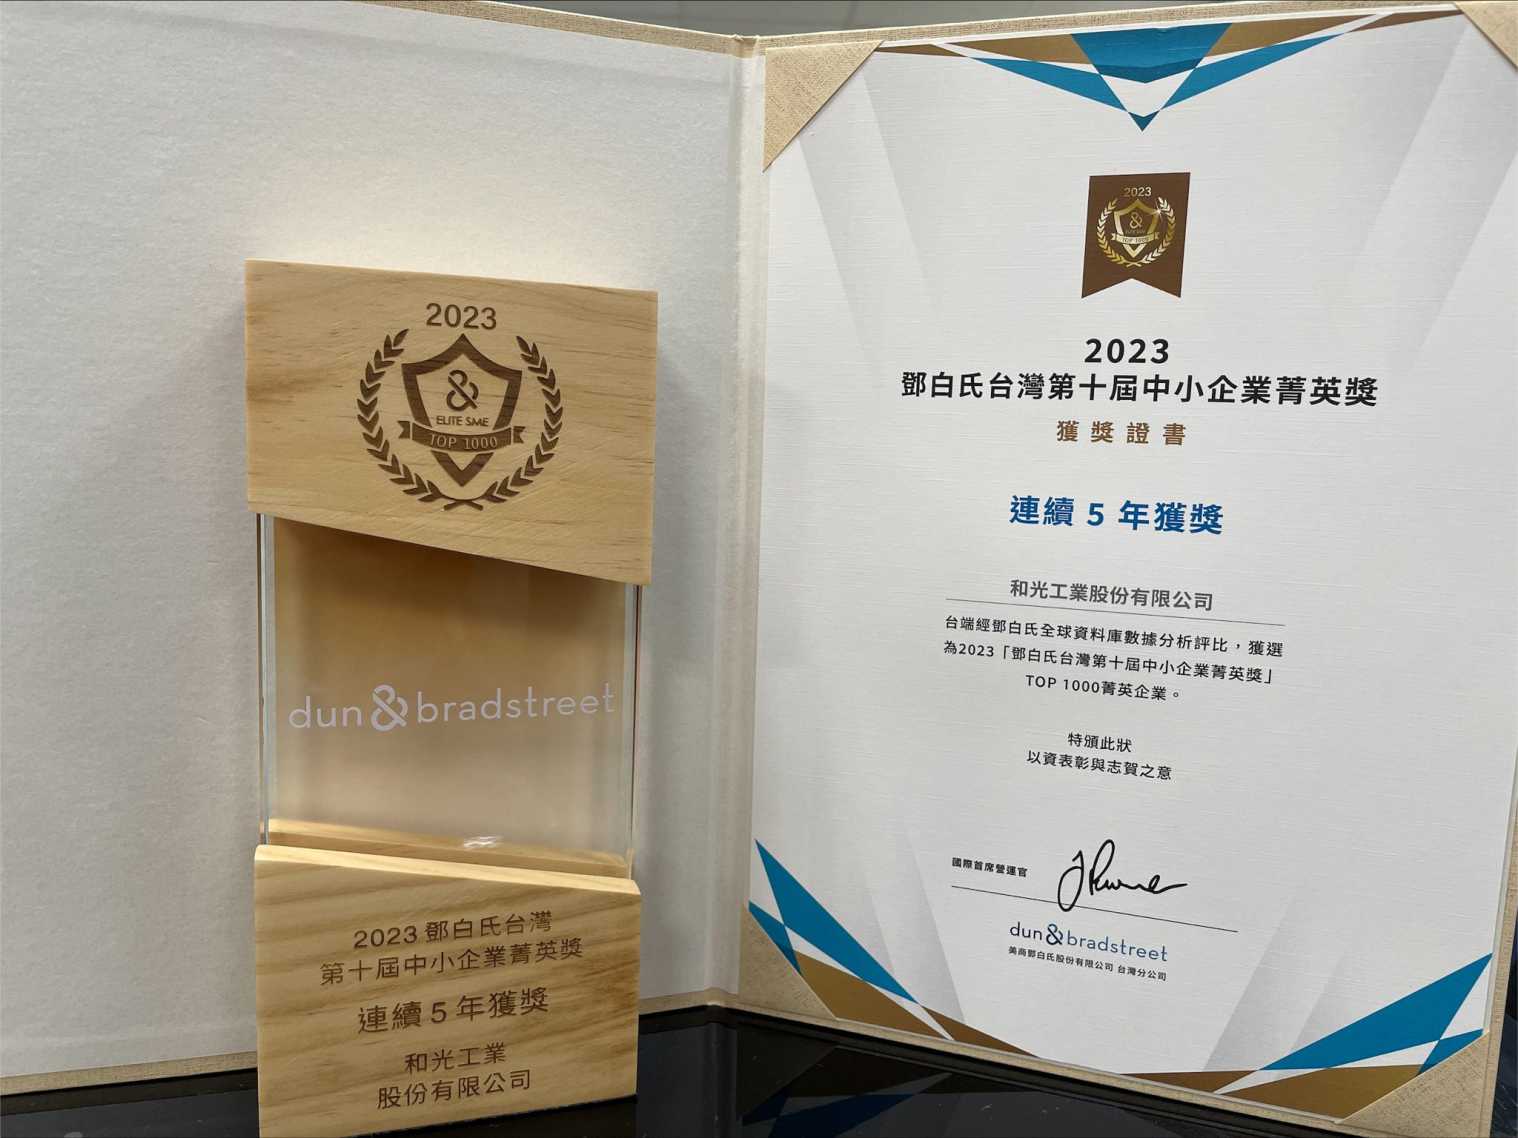 Hokwang has won the D&B award for 5 years in a row